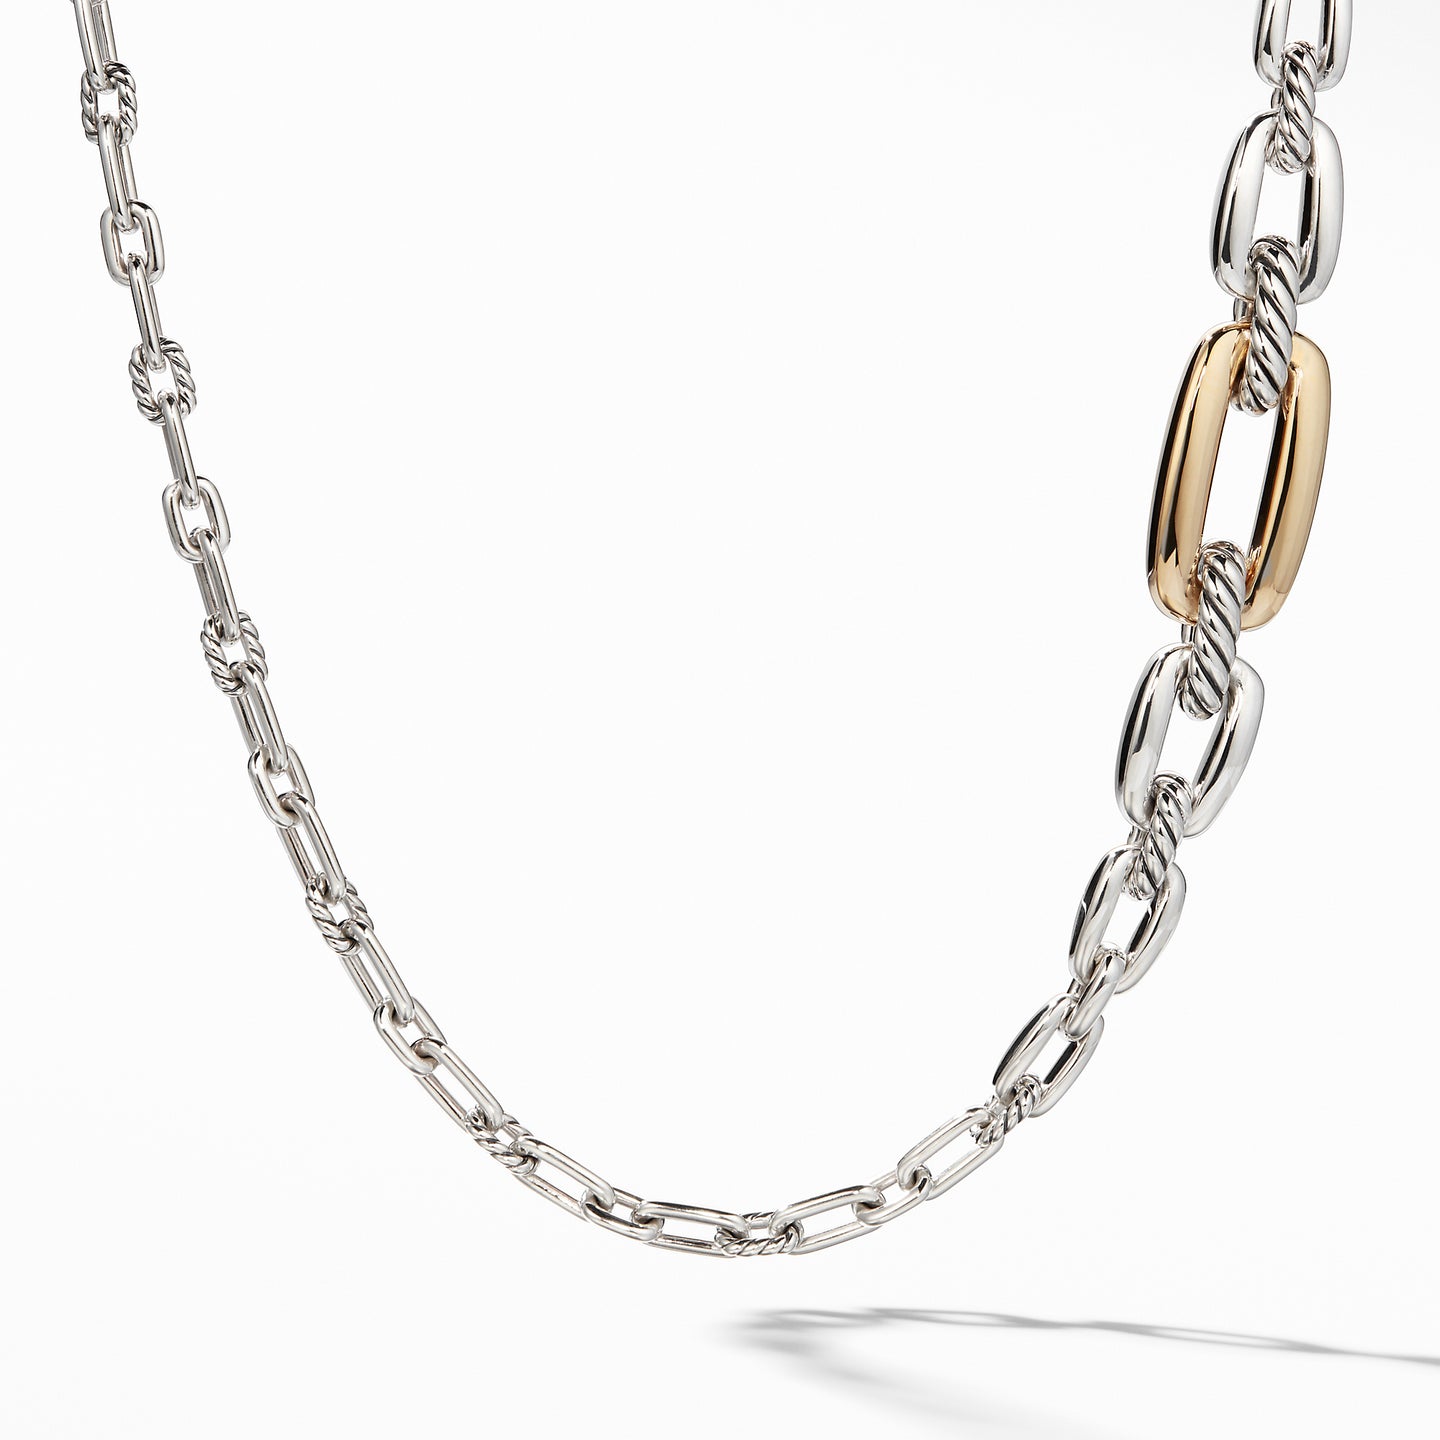 Wellesley Link Long Necklace with 18K Gold, 36